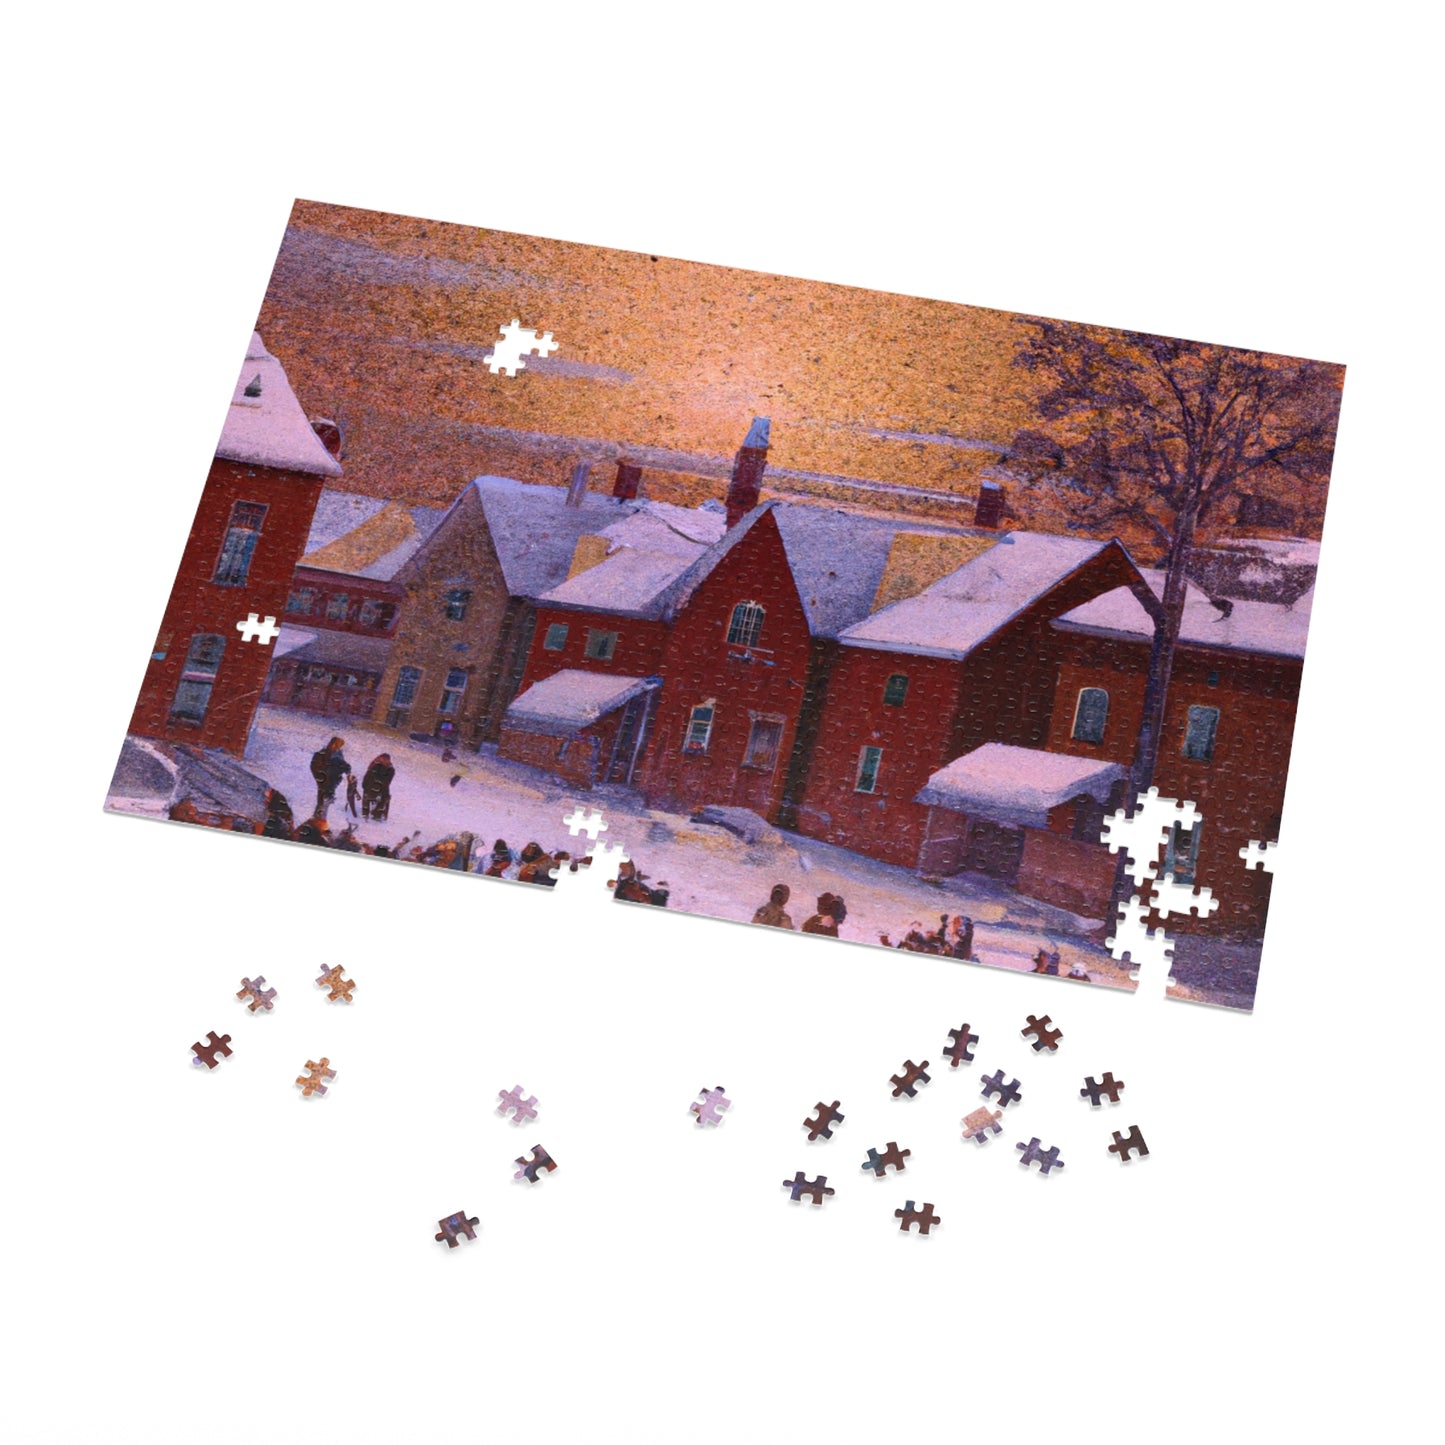 Vintage Christmas Village - JigSaw Puzzle 1000 Piece: Ernestina Clausen - Christmas Gift | Holiday Scenes